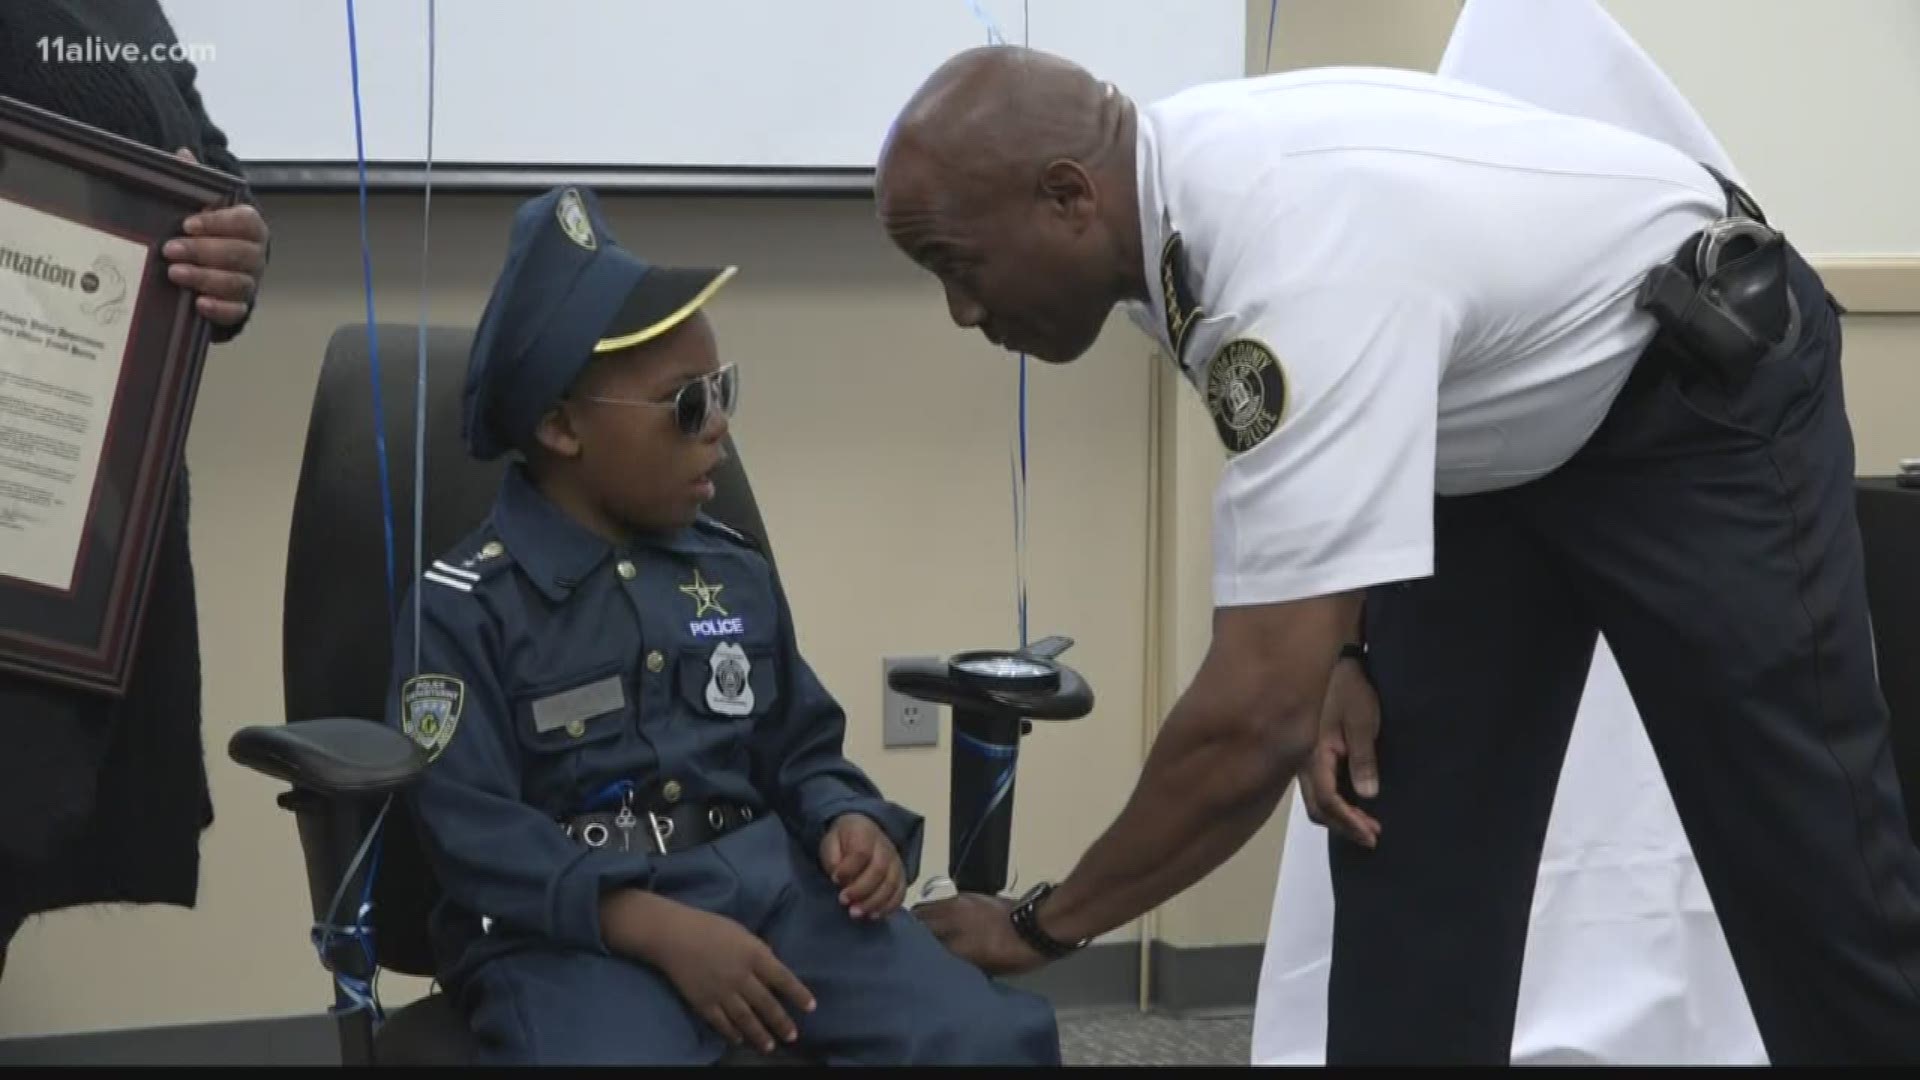 8-year-old Juvell spent Wednesday with the Clayton County Police Department.